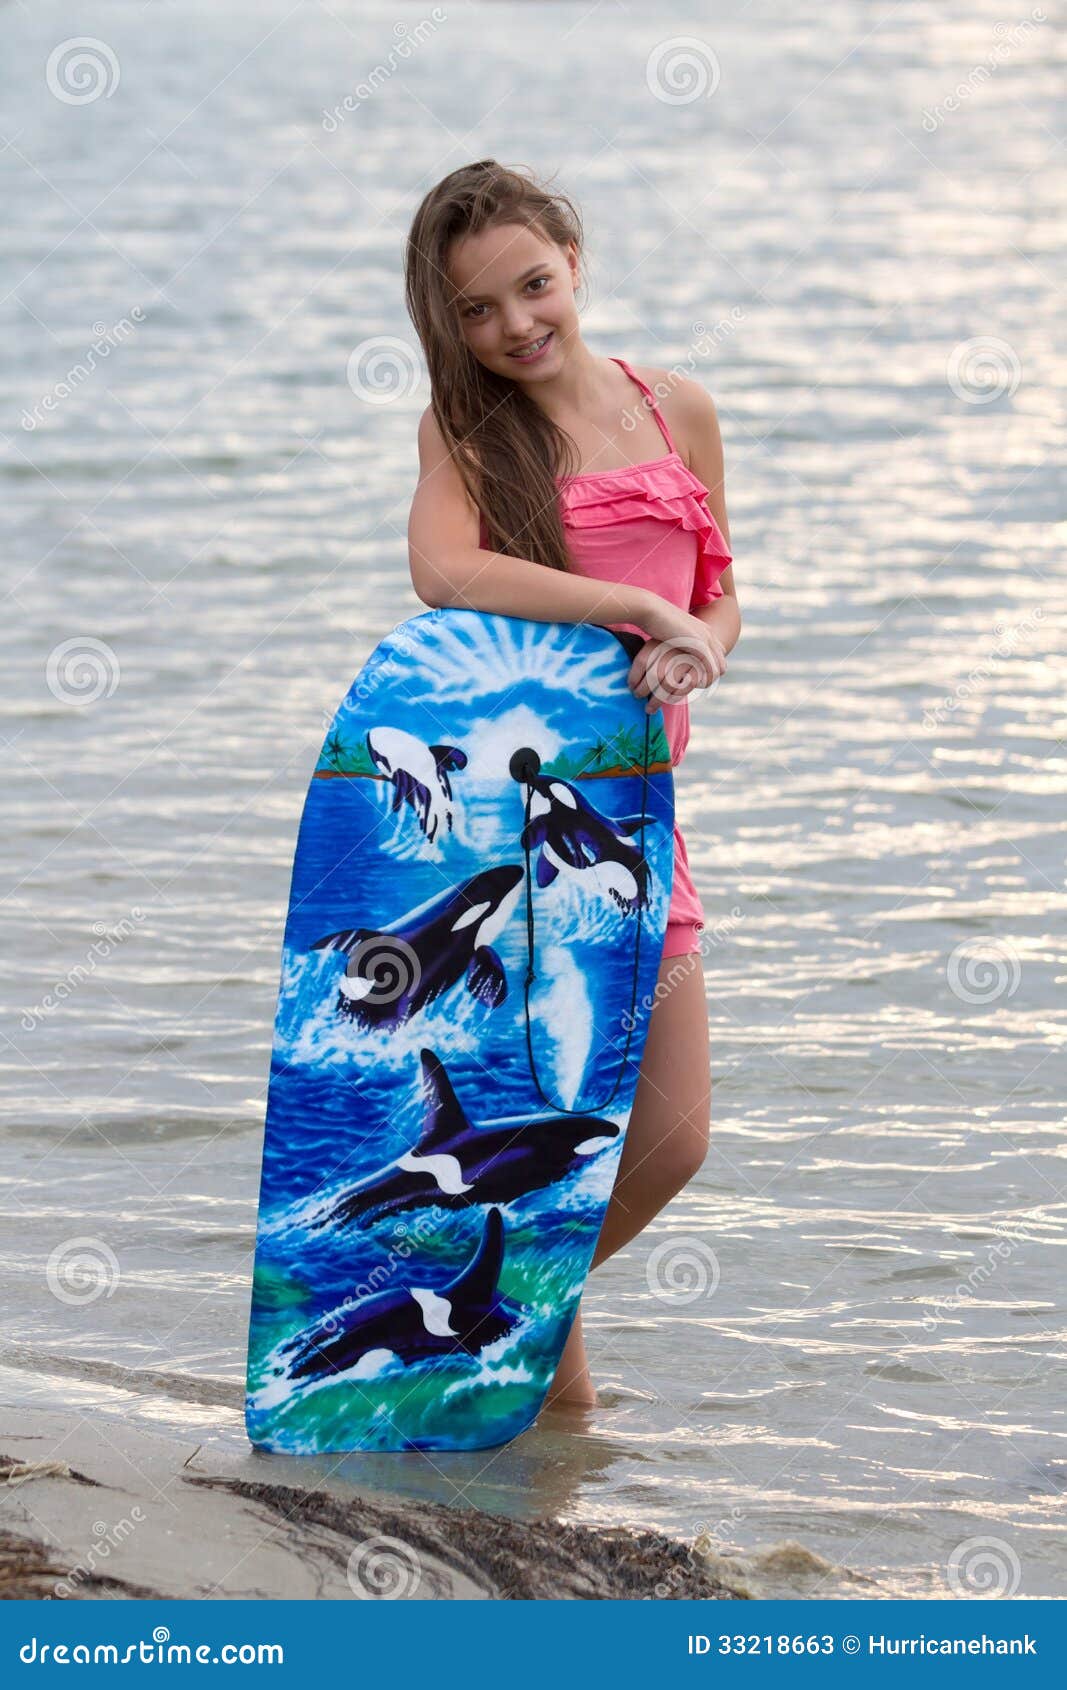 Surfing To Other Teen 88